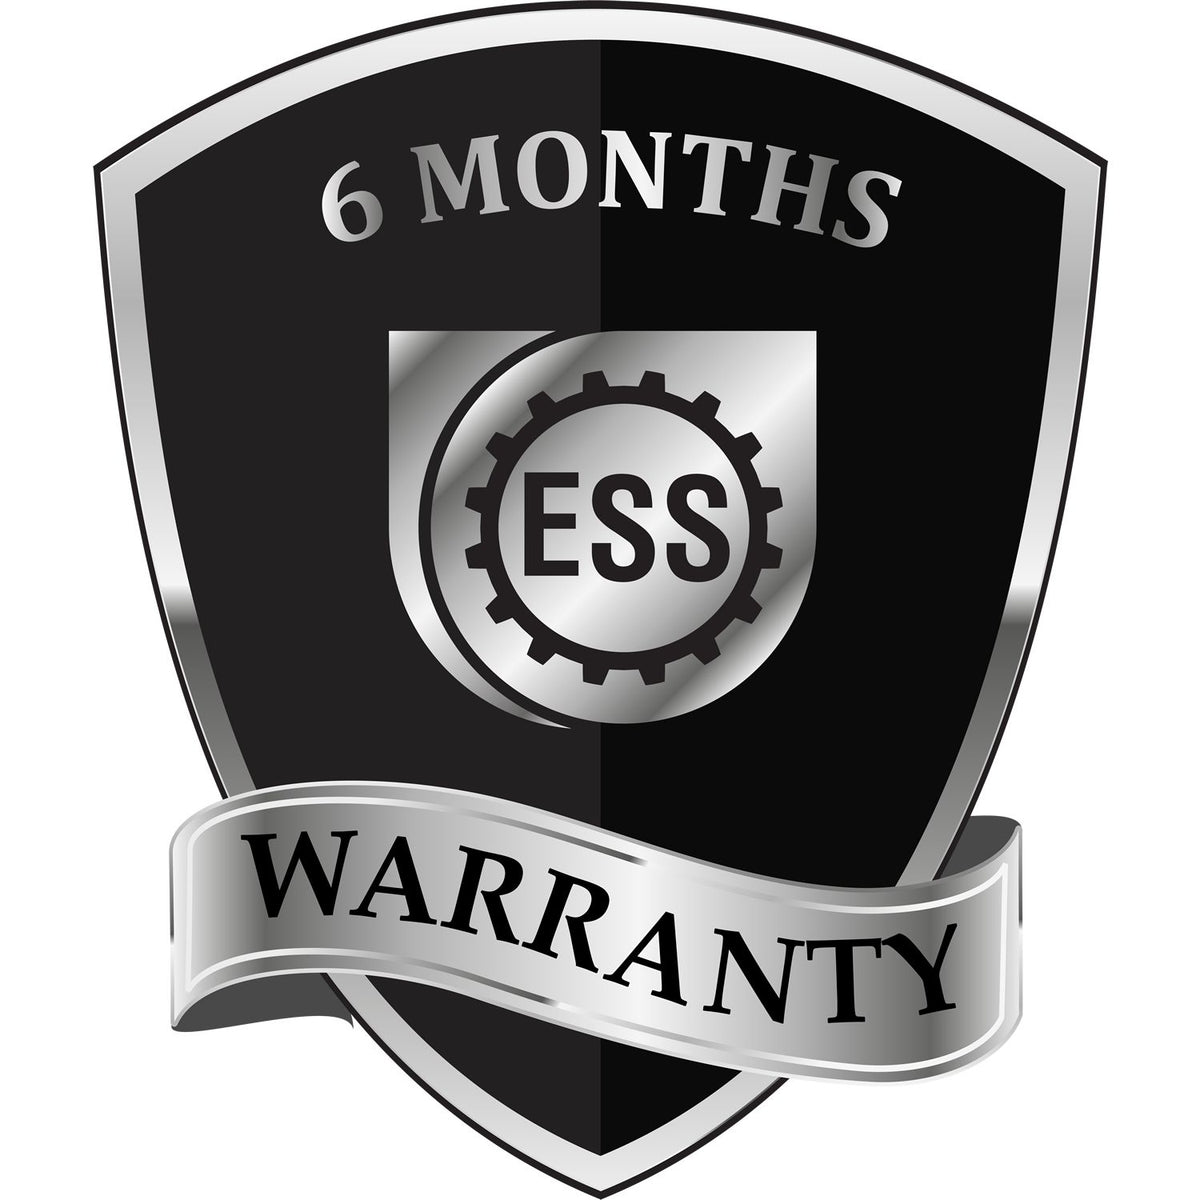 A black and silver badge or emblem showing warranty information for the Florida Professional Geologist Seal Stamp